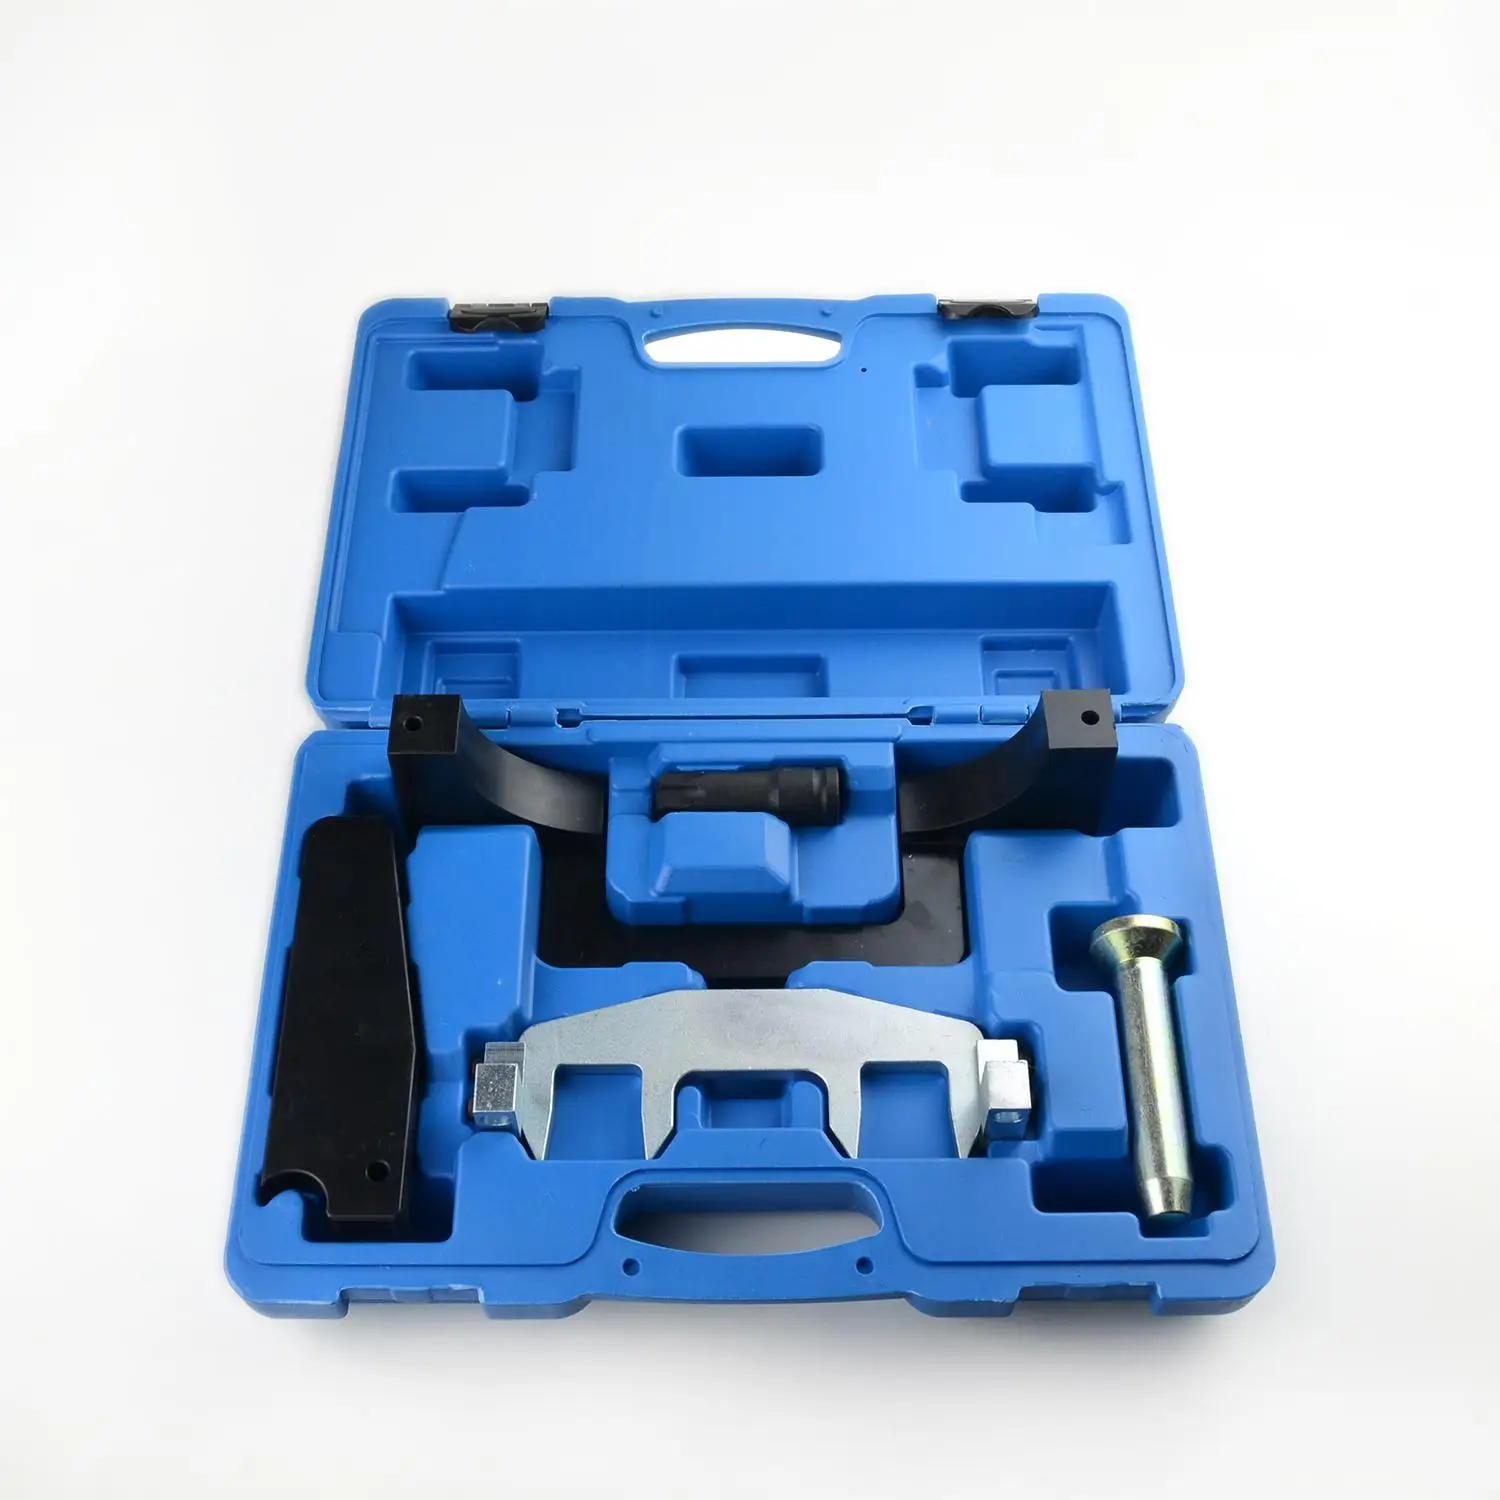 AP02 For Mercedes M271 W203 W204 W211 W212 W209 R171 C200 E260 C180 Camshaft Timing Chain Installation Kit Engine Timing Tool